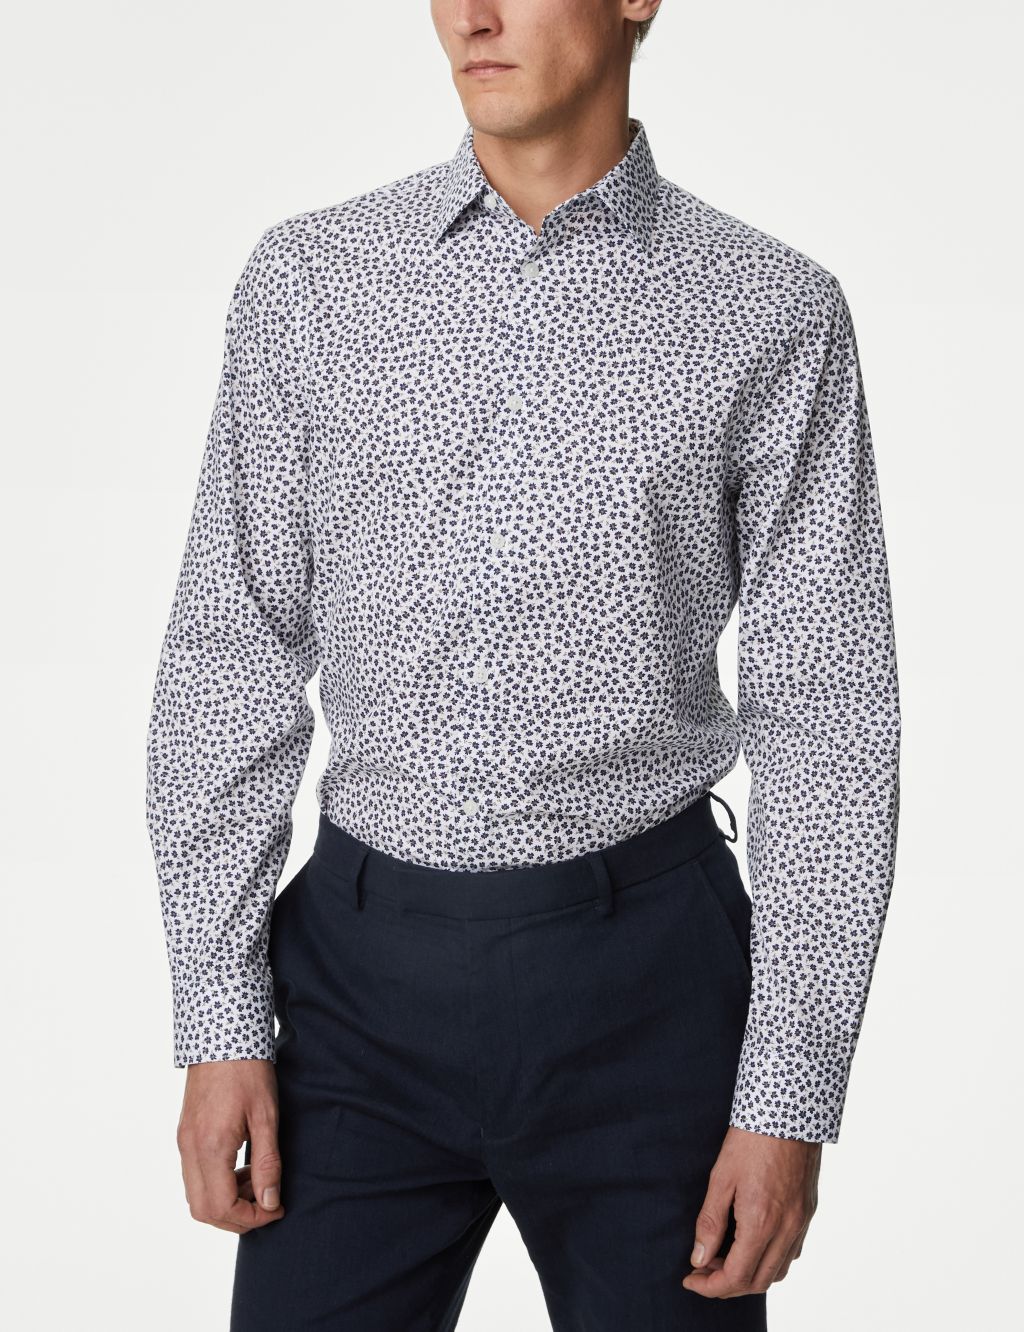 Page 3 - Men’s Formal Shirts | M&S